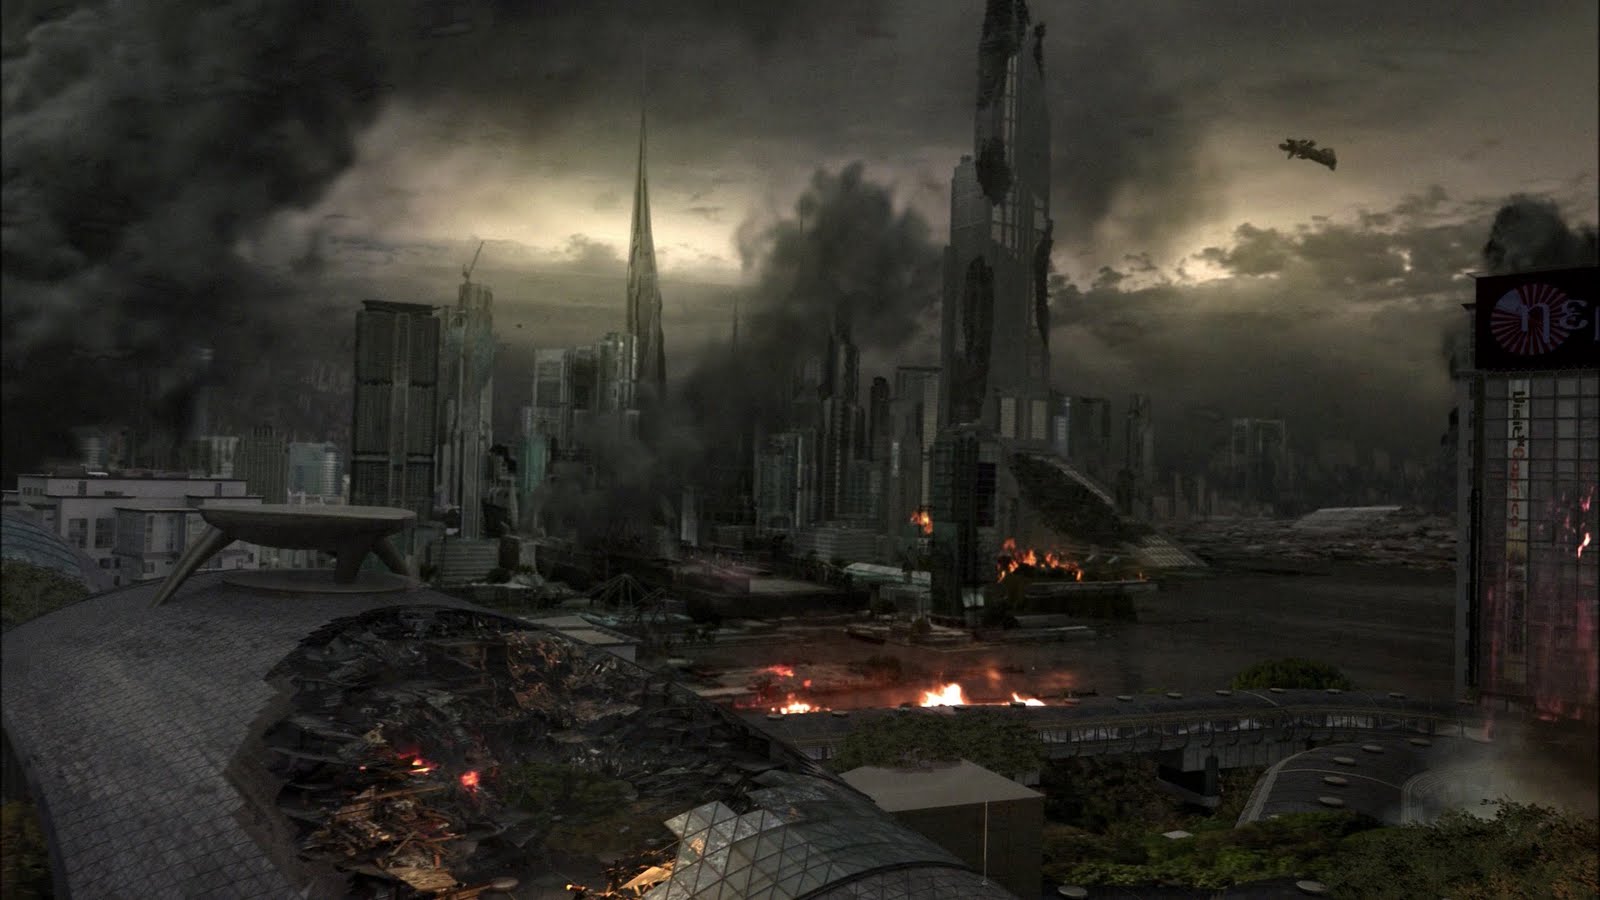 Caprica After The Bombing